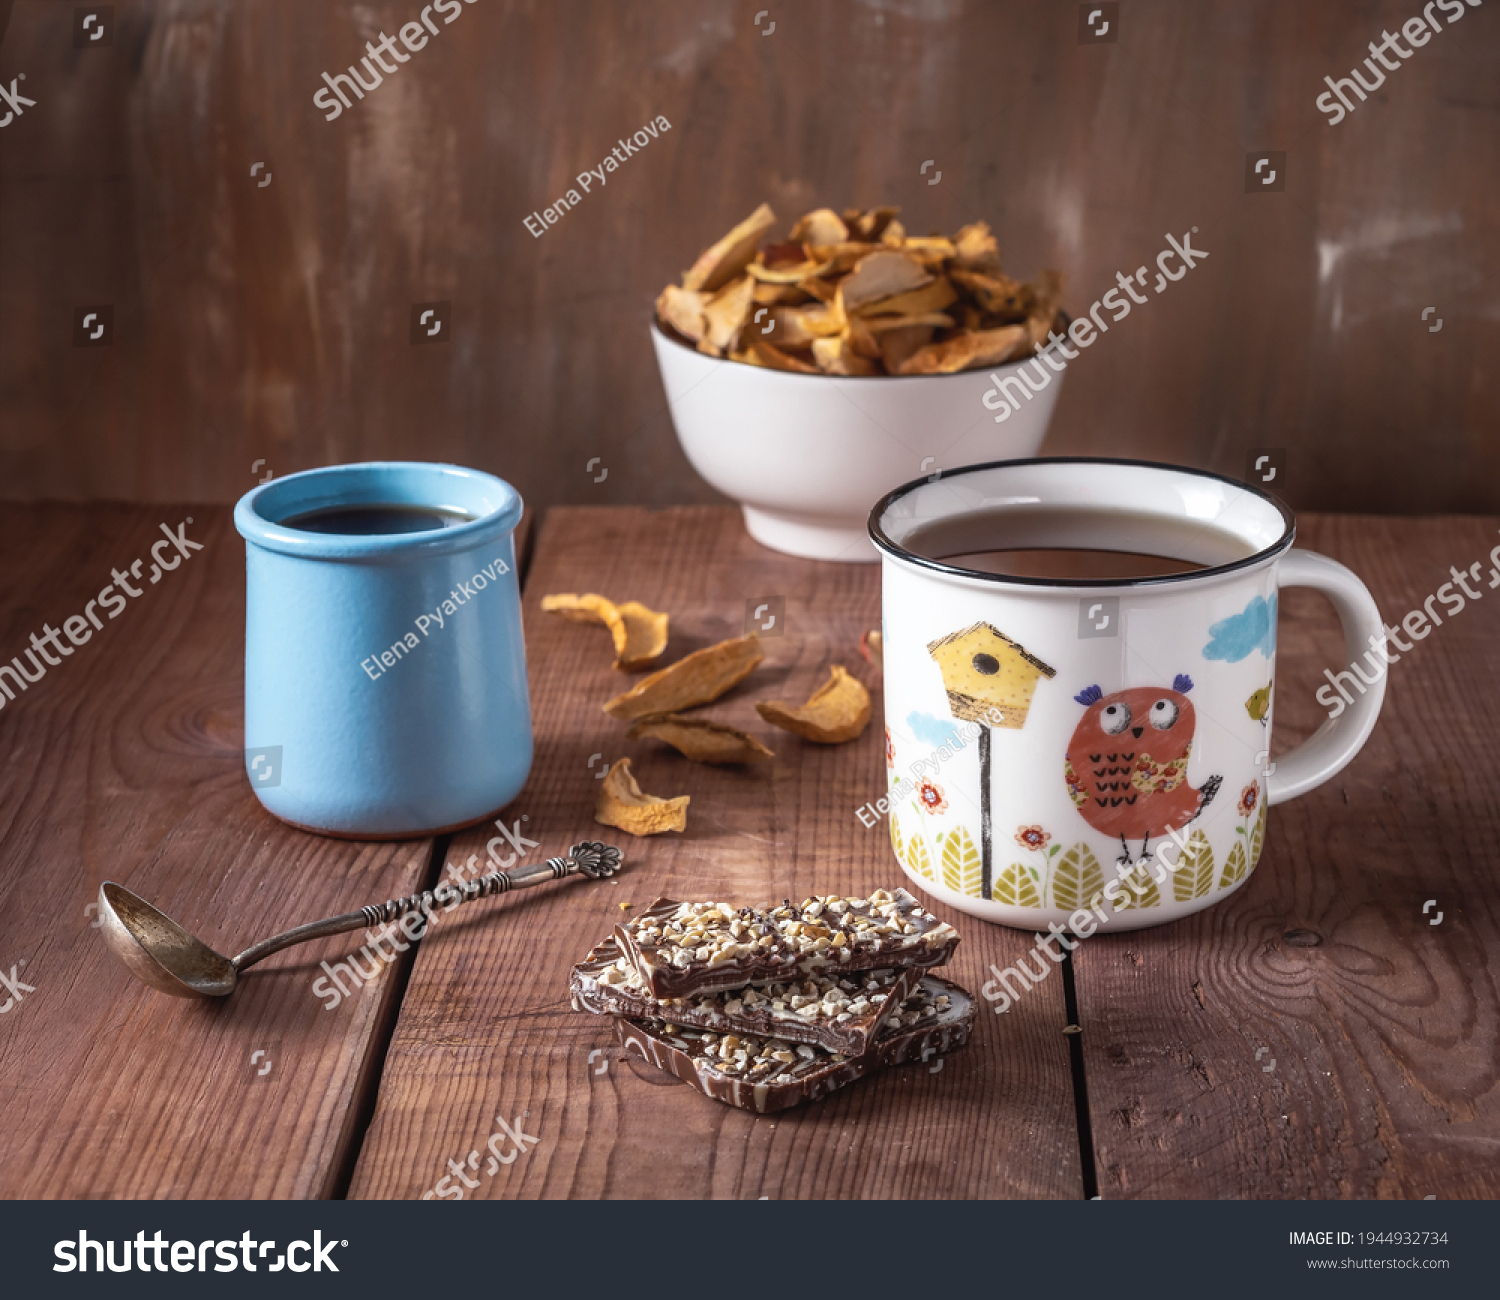 Delicious sweet lunch with apple chis and apple syrup, tea in a large mug with a pattern on a wooden toe cap #1944932734